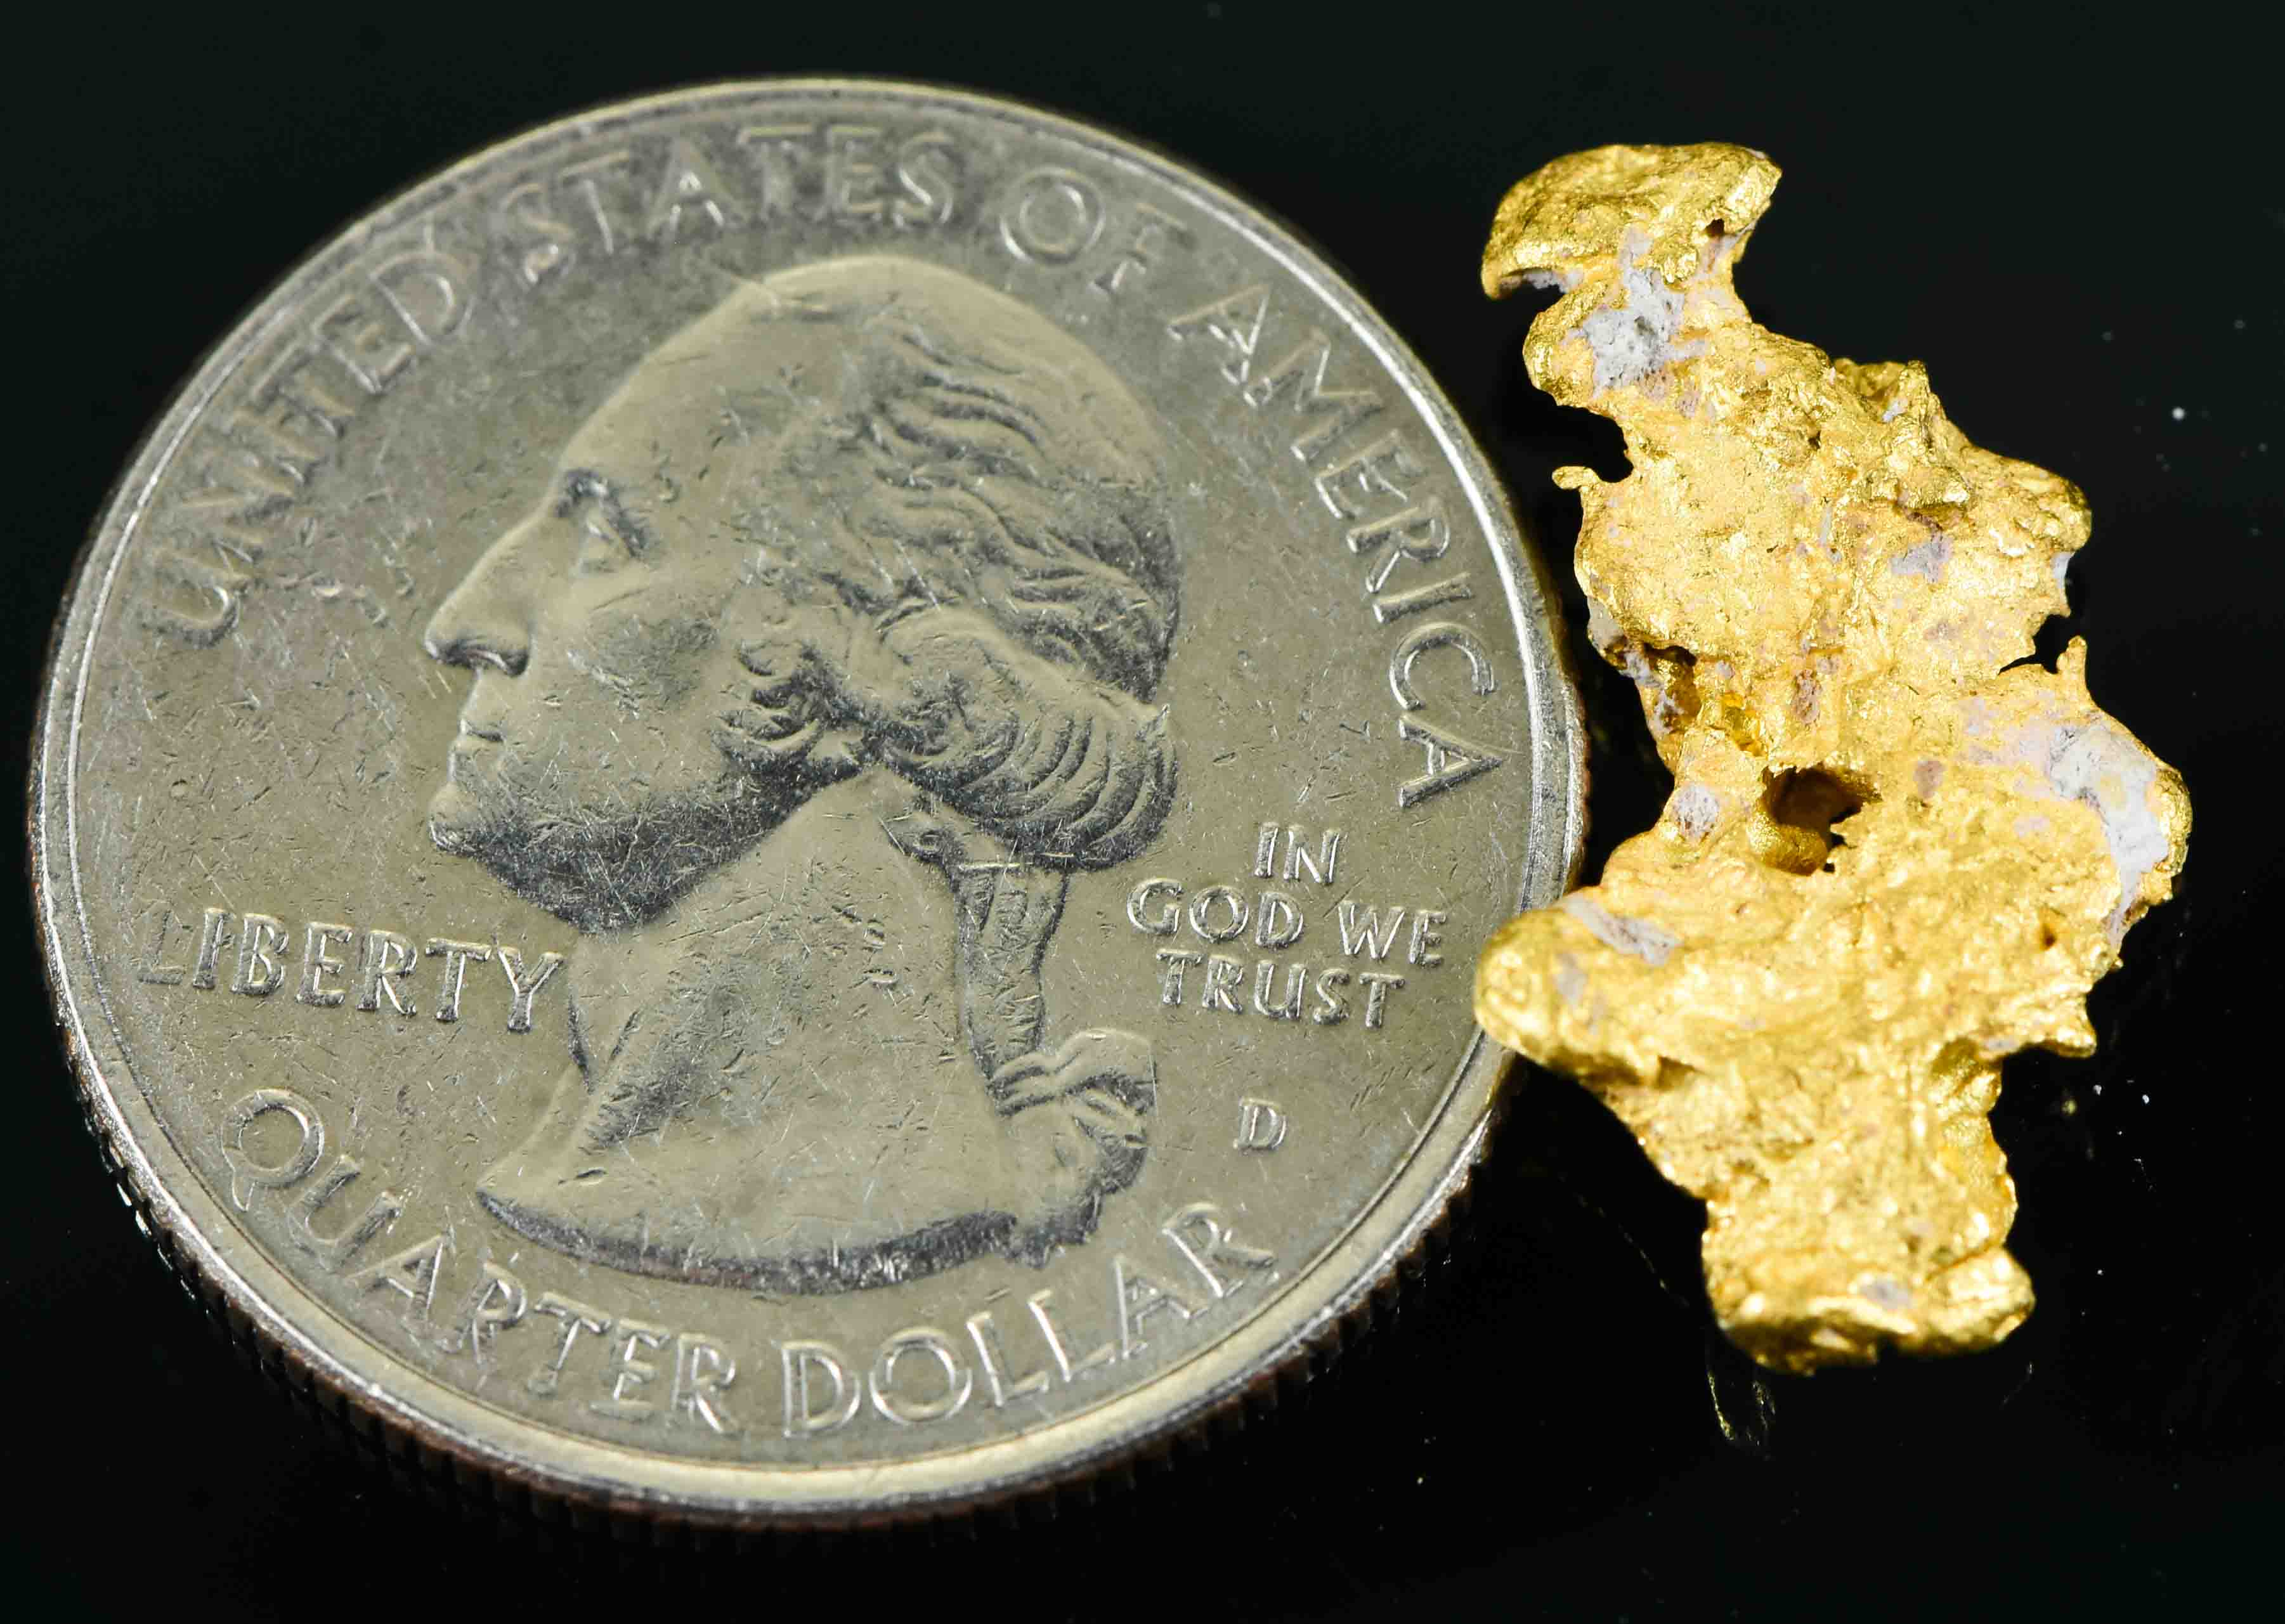 #22 Australian Natural Gold Nugget With Quartz Weighs 3.05 Grams.